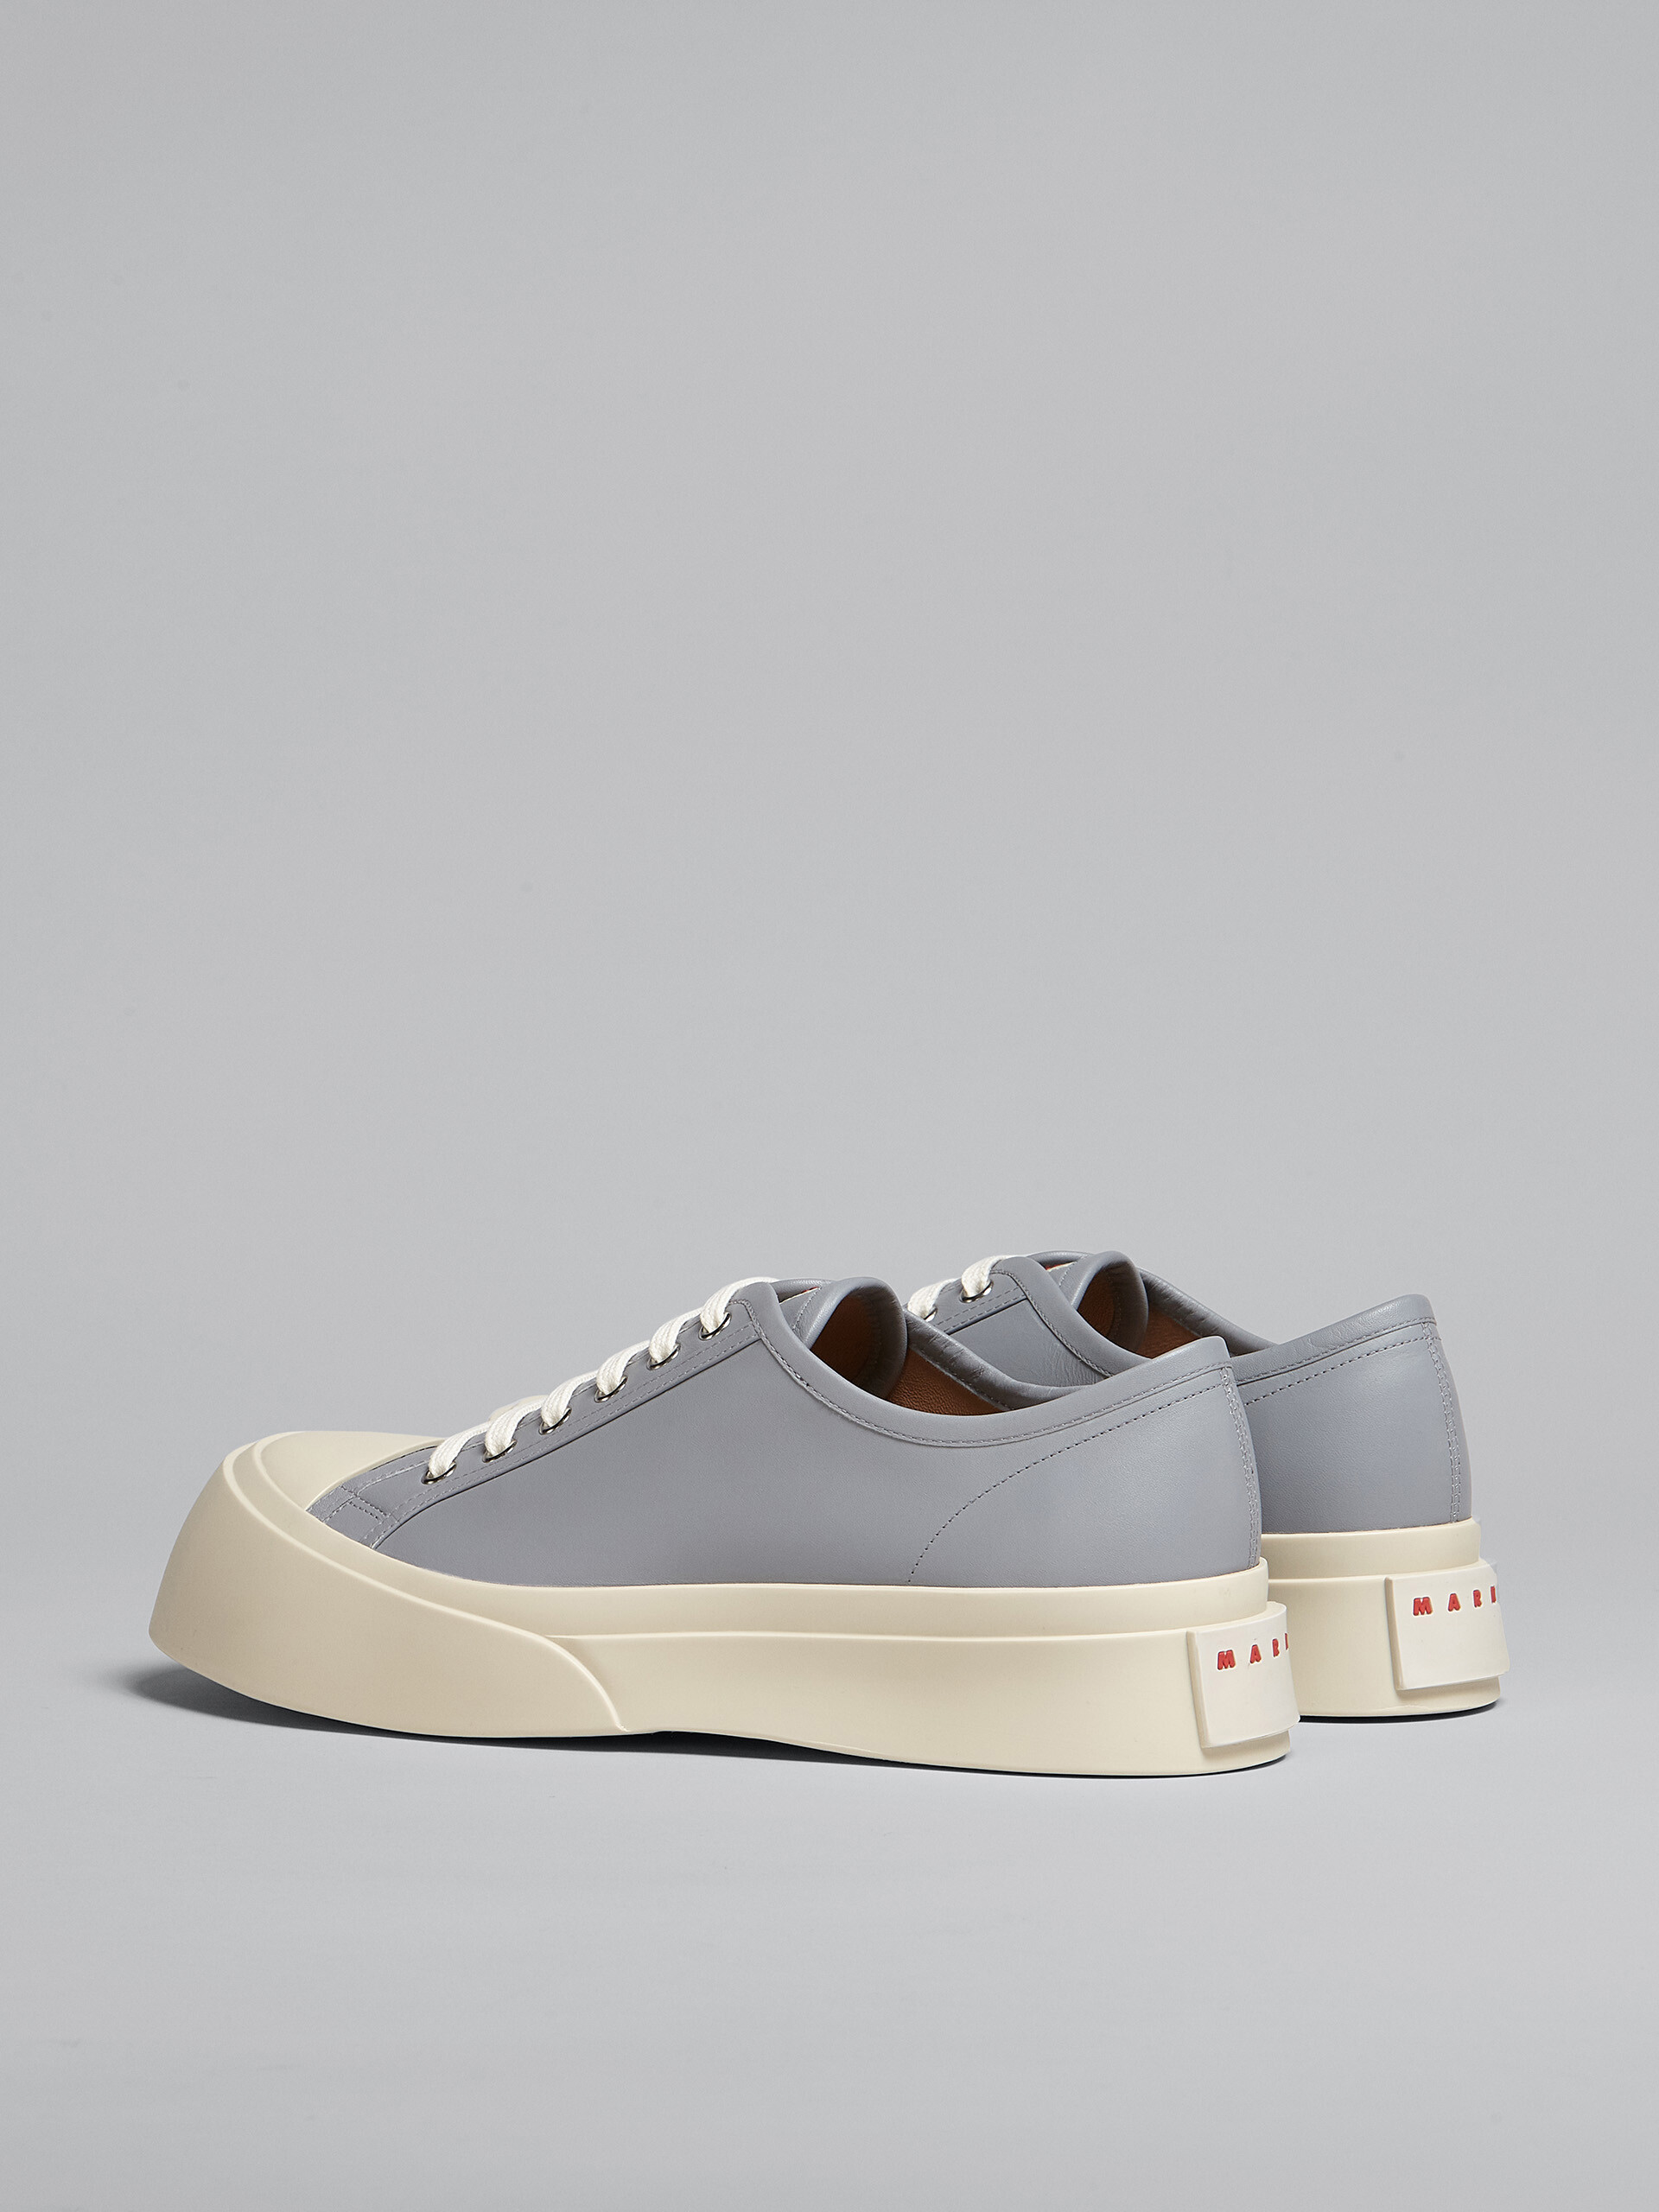 Grey nappa leather PABLO sneaker - Sneakers - Image 3